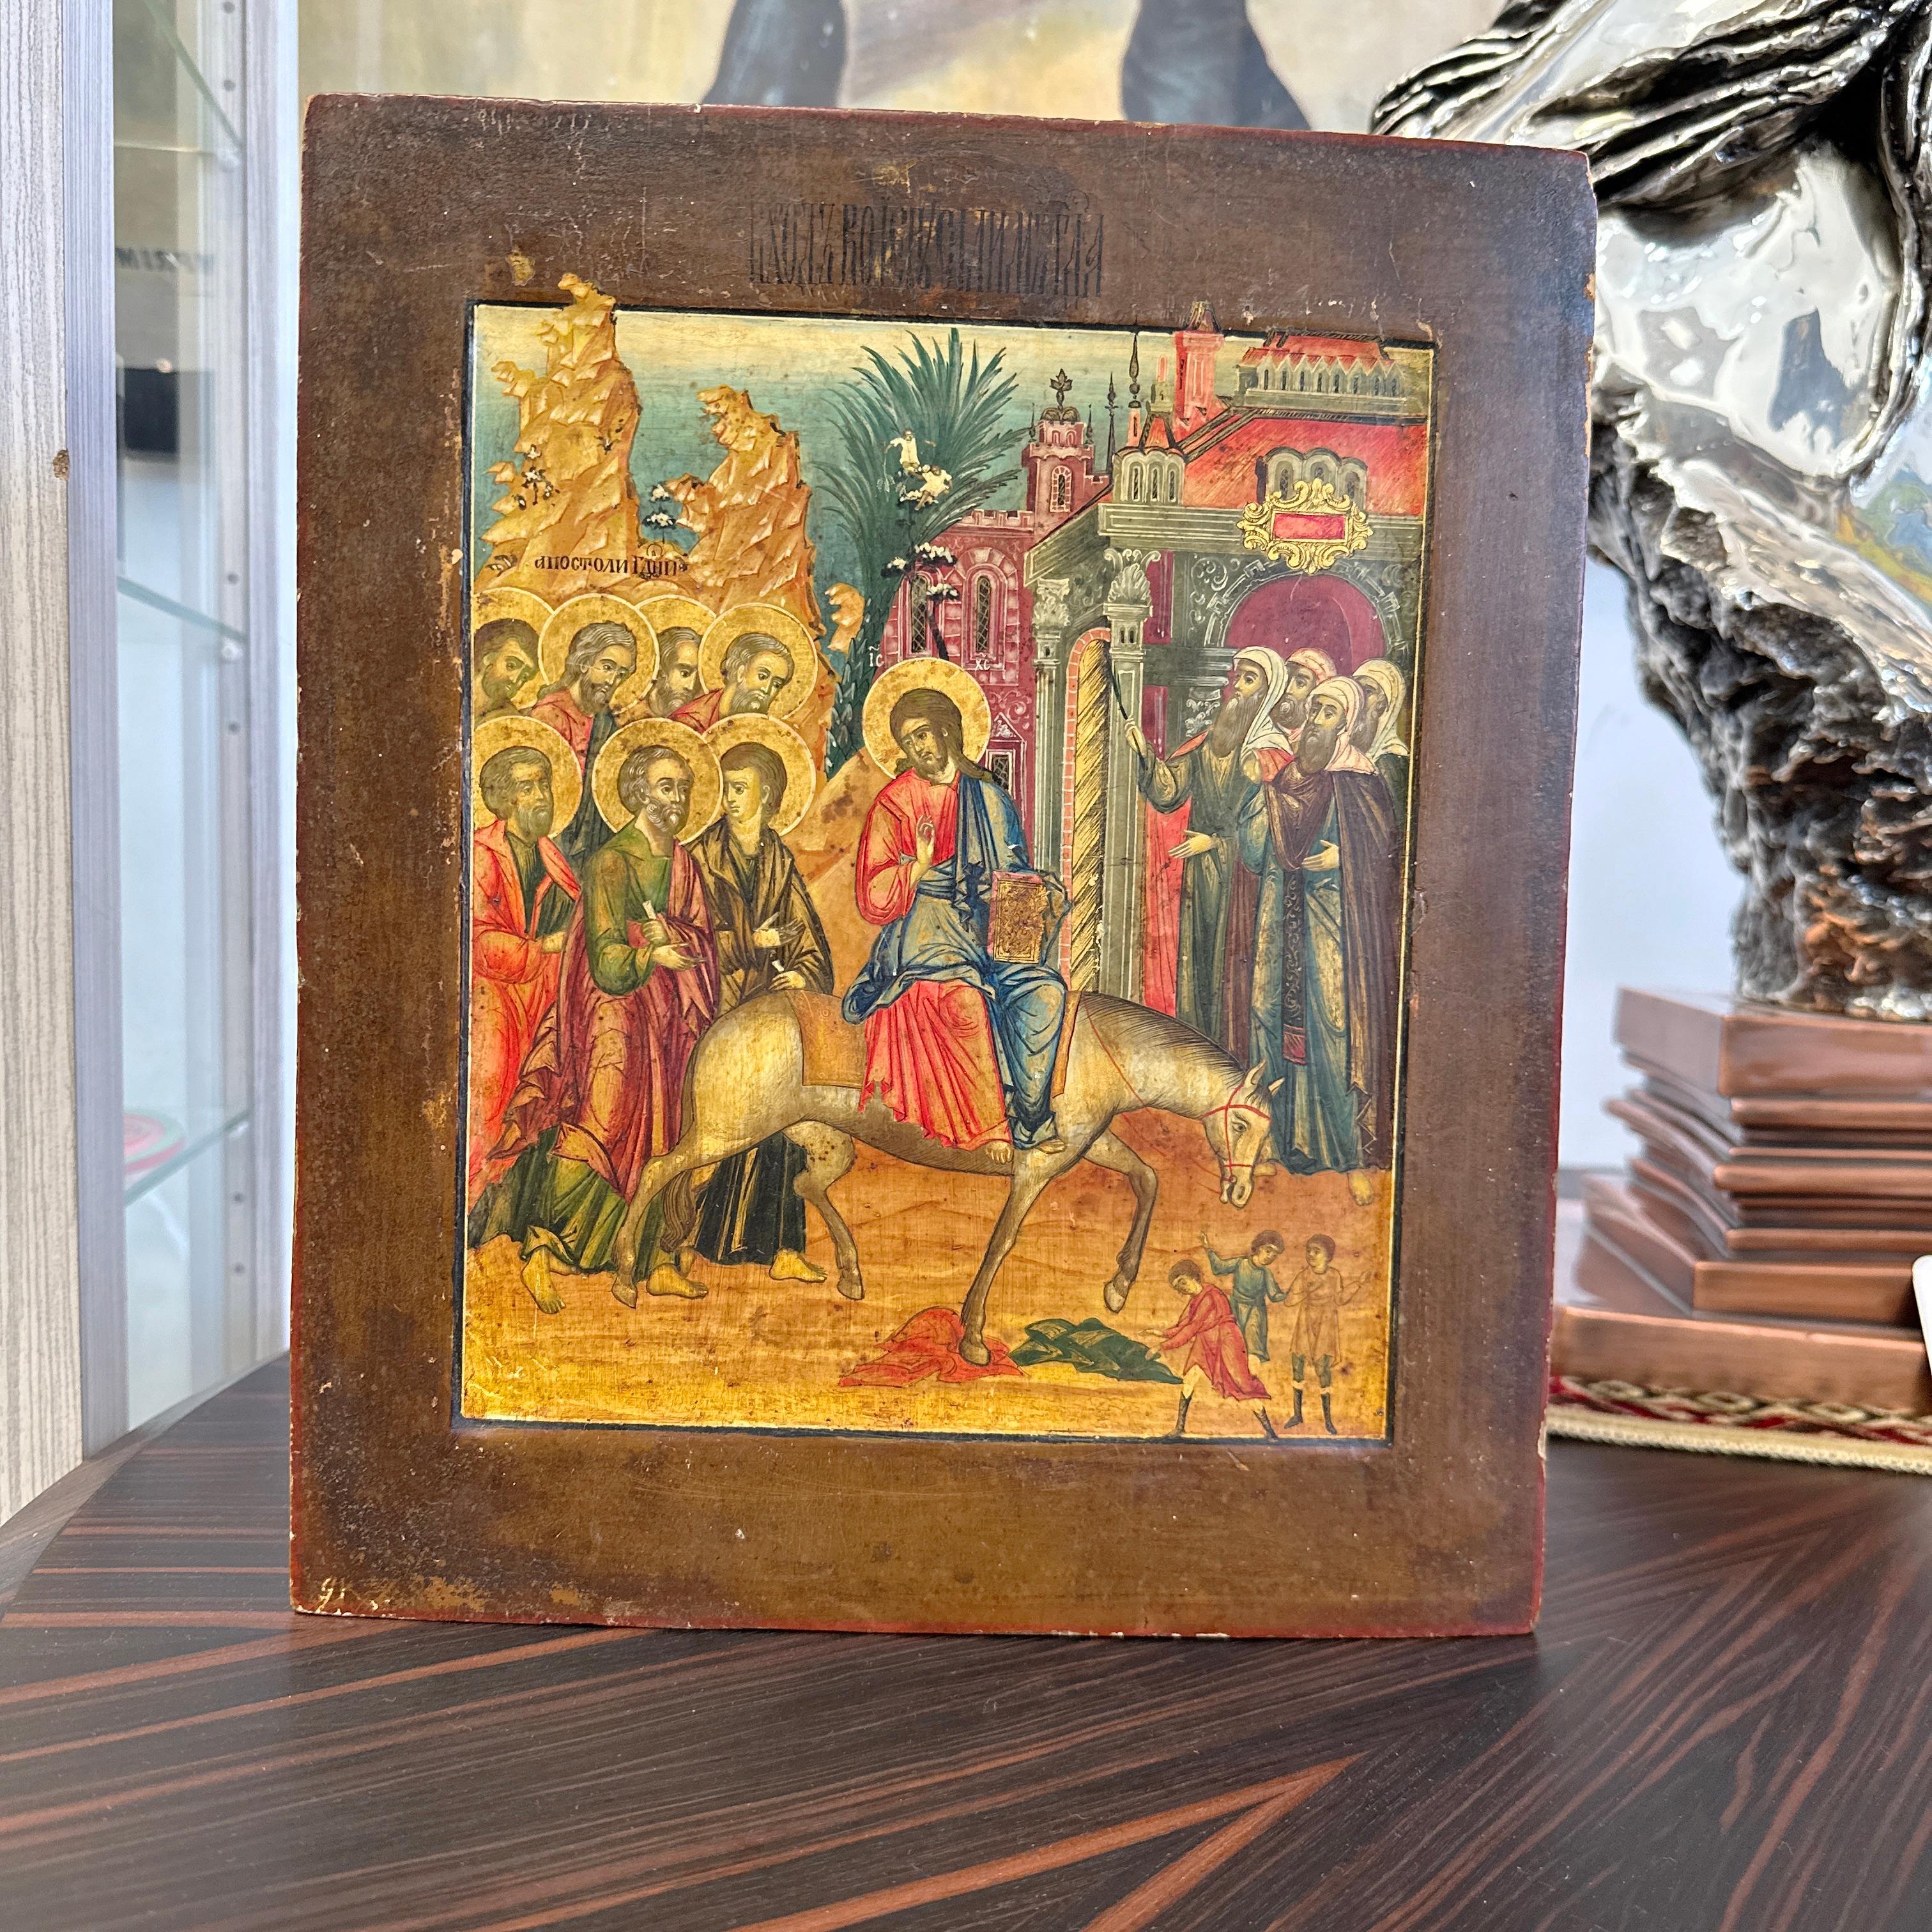 Here is a beautiful Russian school icon depicting Christ’s triumphant entry into Jerusalem. 

Medium: Egg tempera and gold gilding on wood. 

Very nice detail and quality gilding on this early 20th century Russian school icon. Based on the 14th